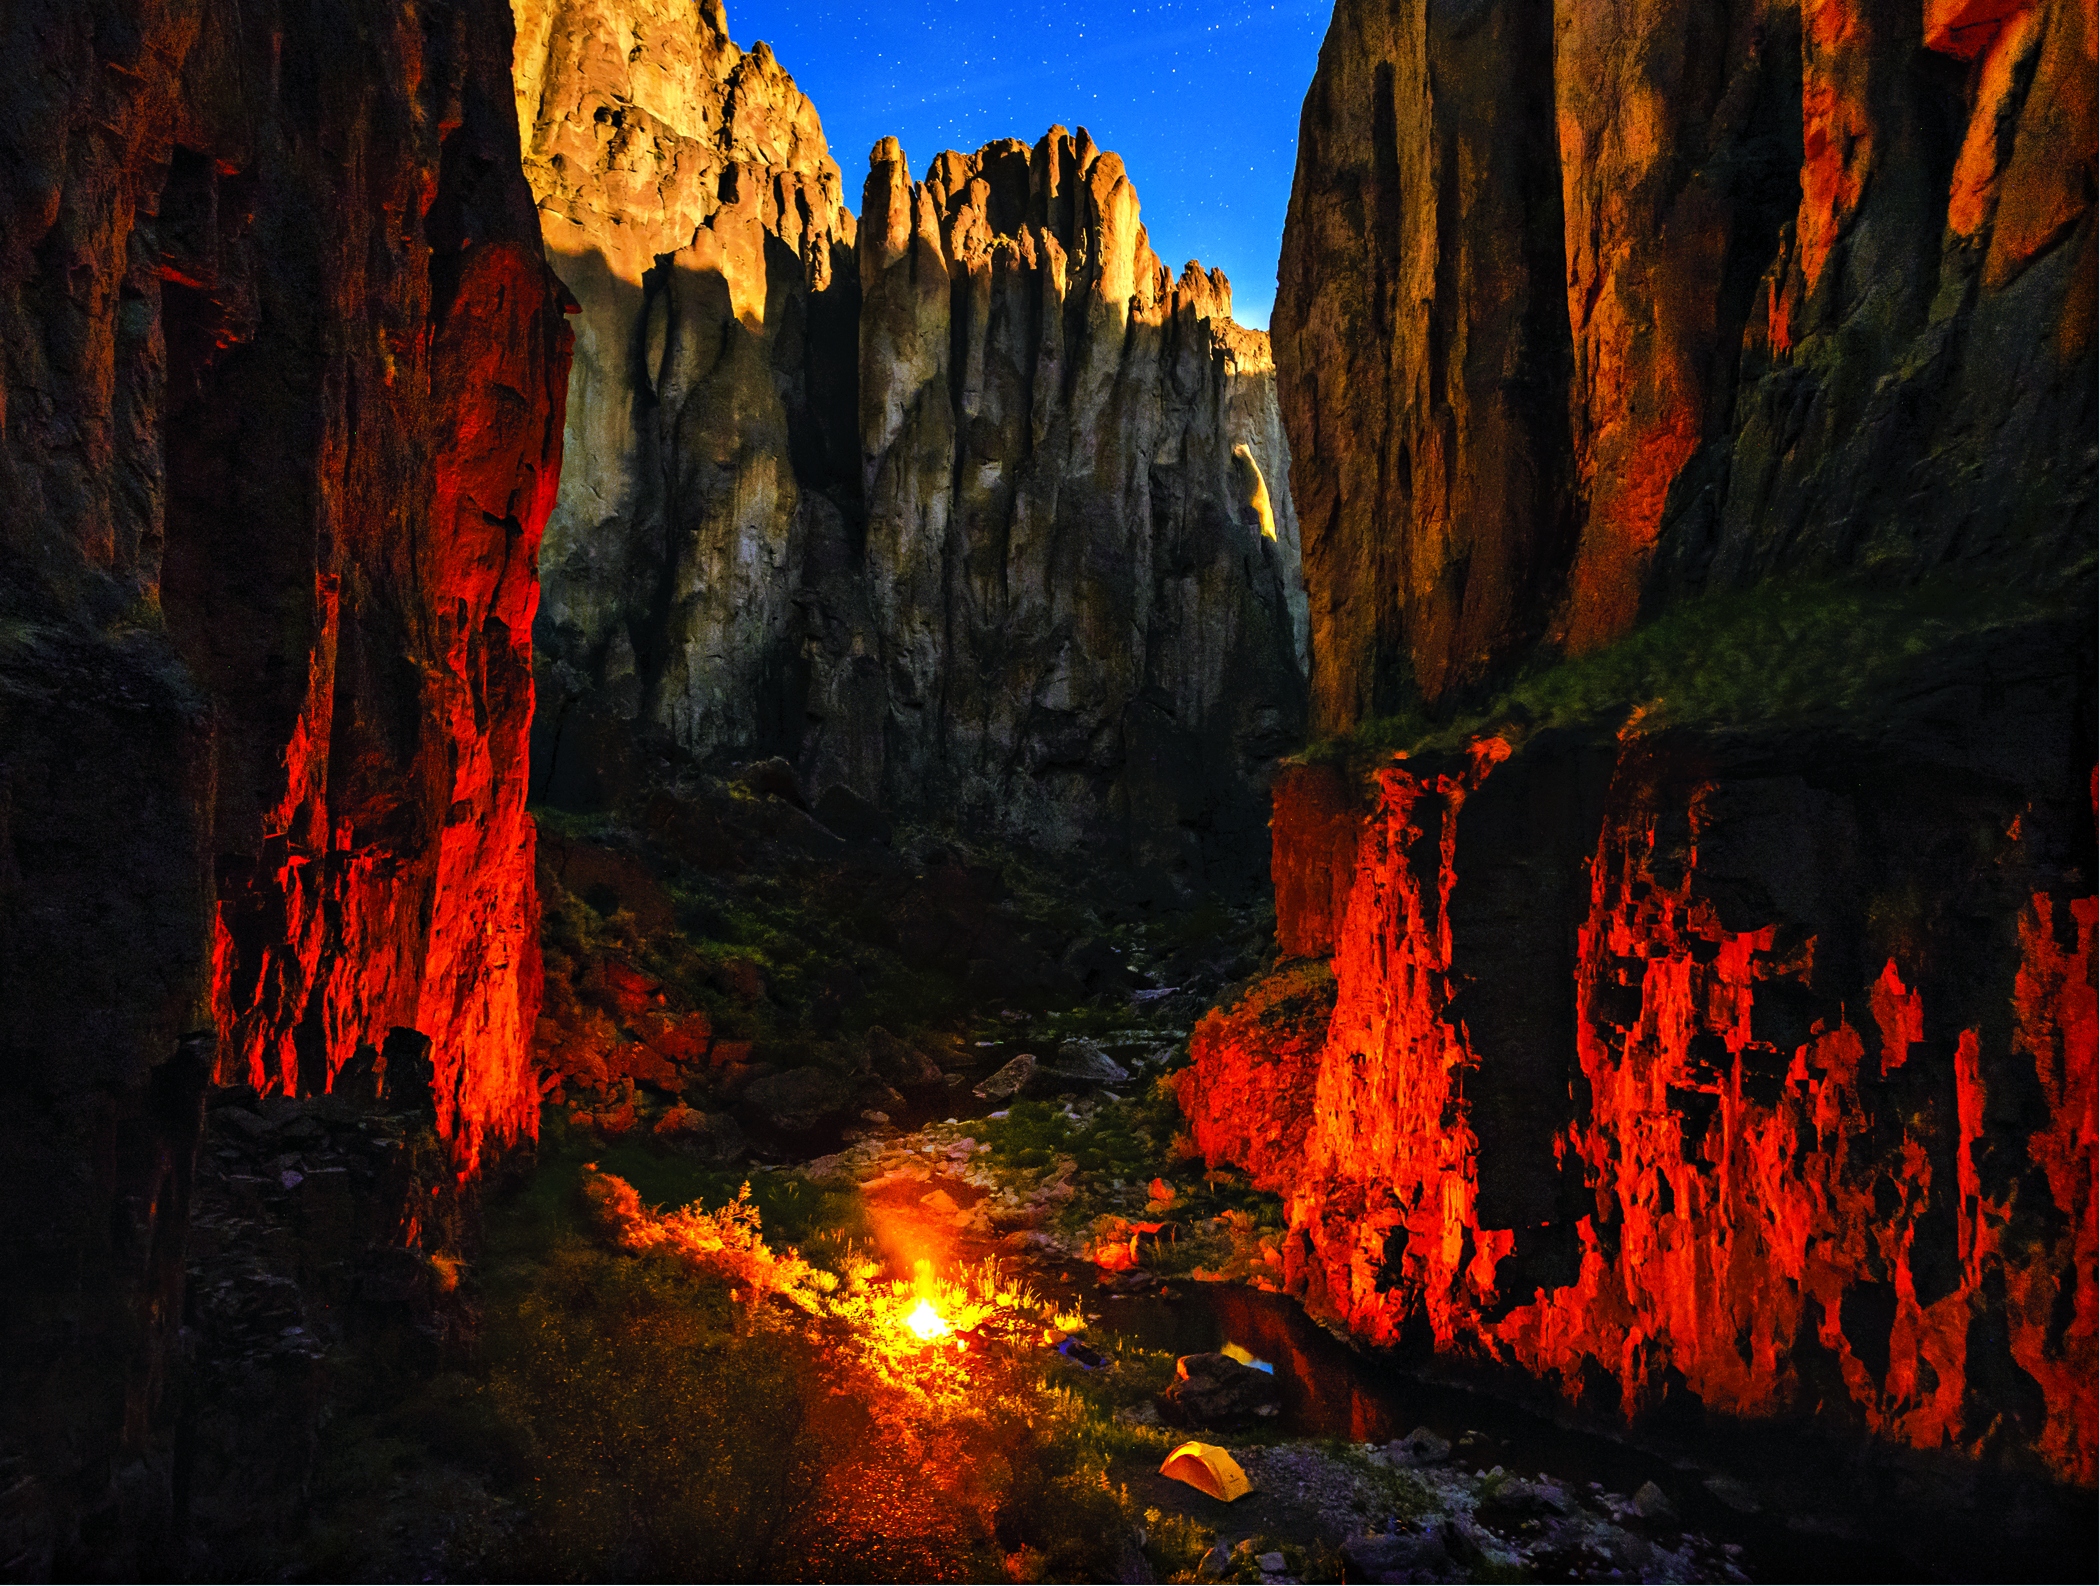 A small fire burns in a large canyon at night.